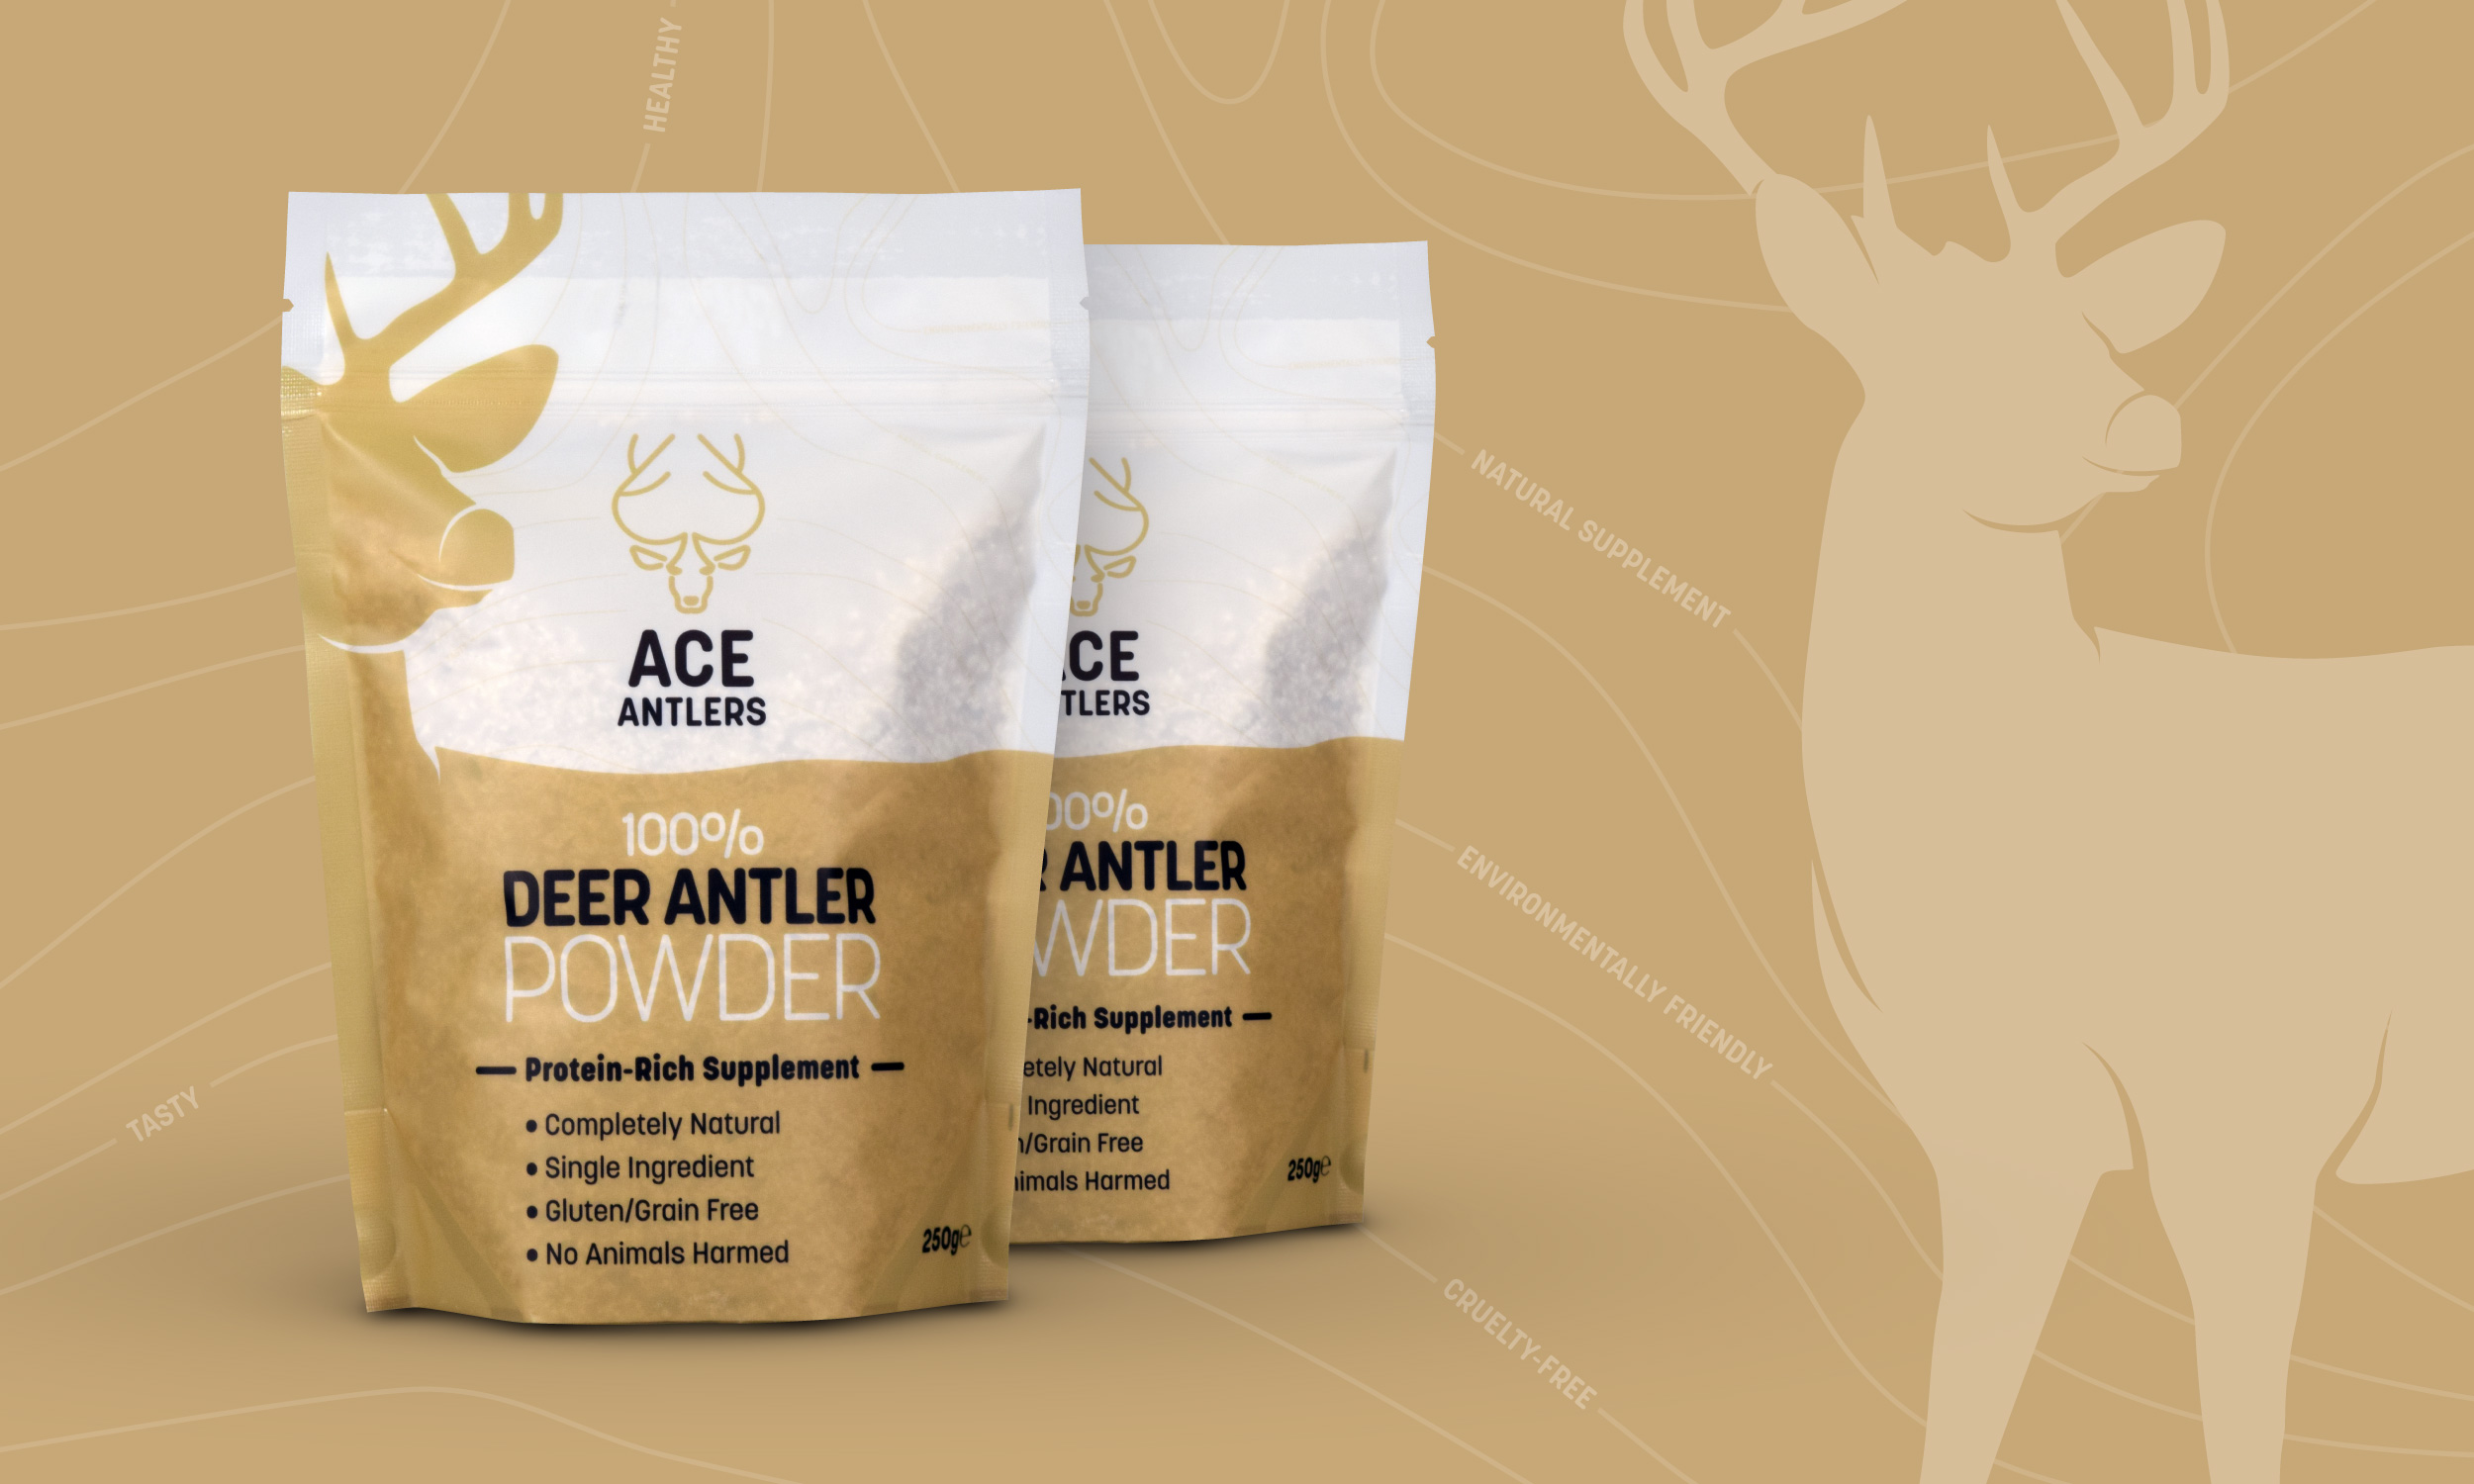 Ace Antlers Deer Antler Powder Pouch